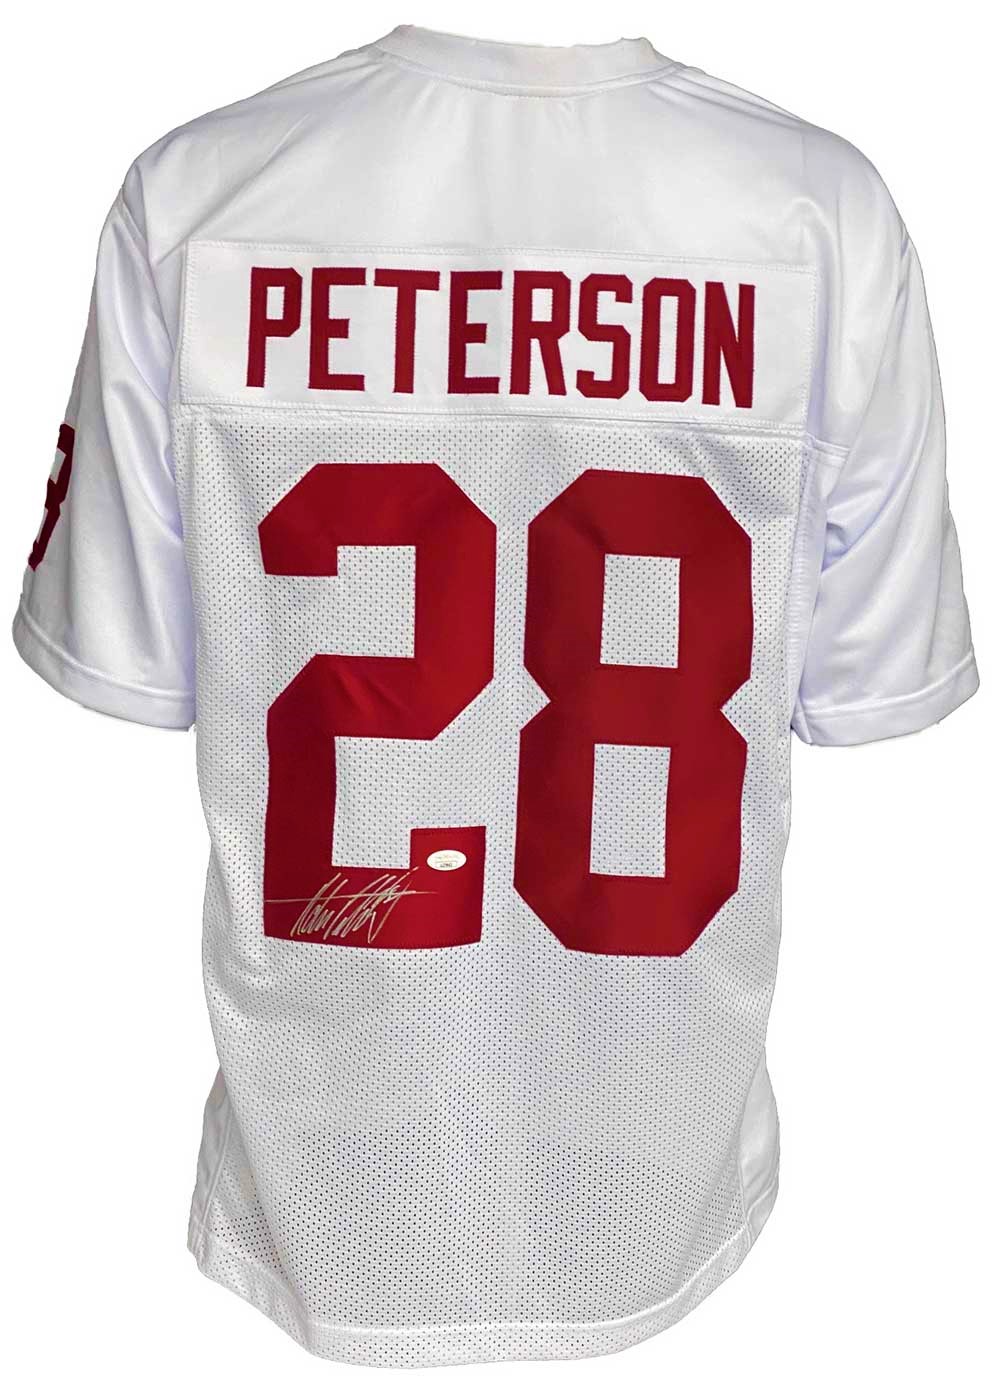 Adrian Peterson Oklahoma Sooners Football Jersey (In-Stock